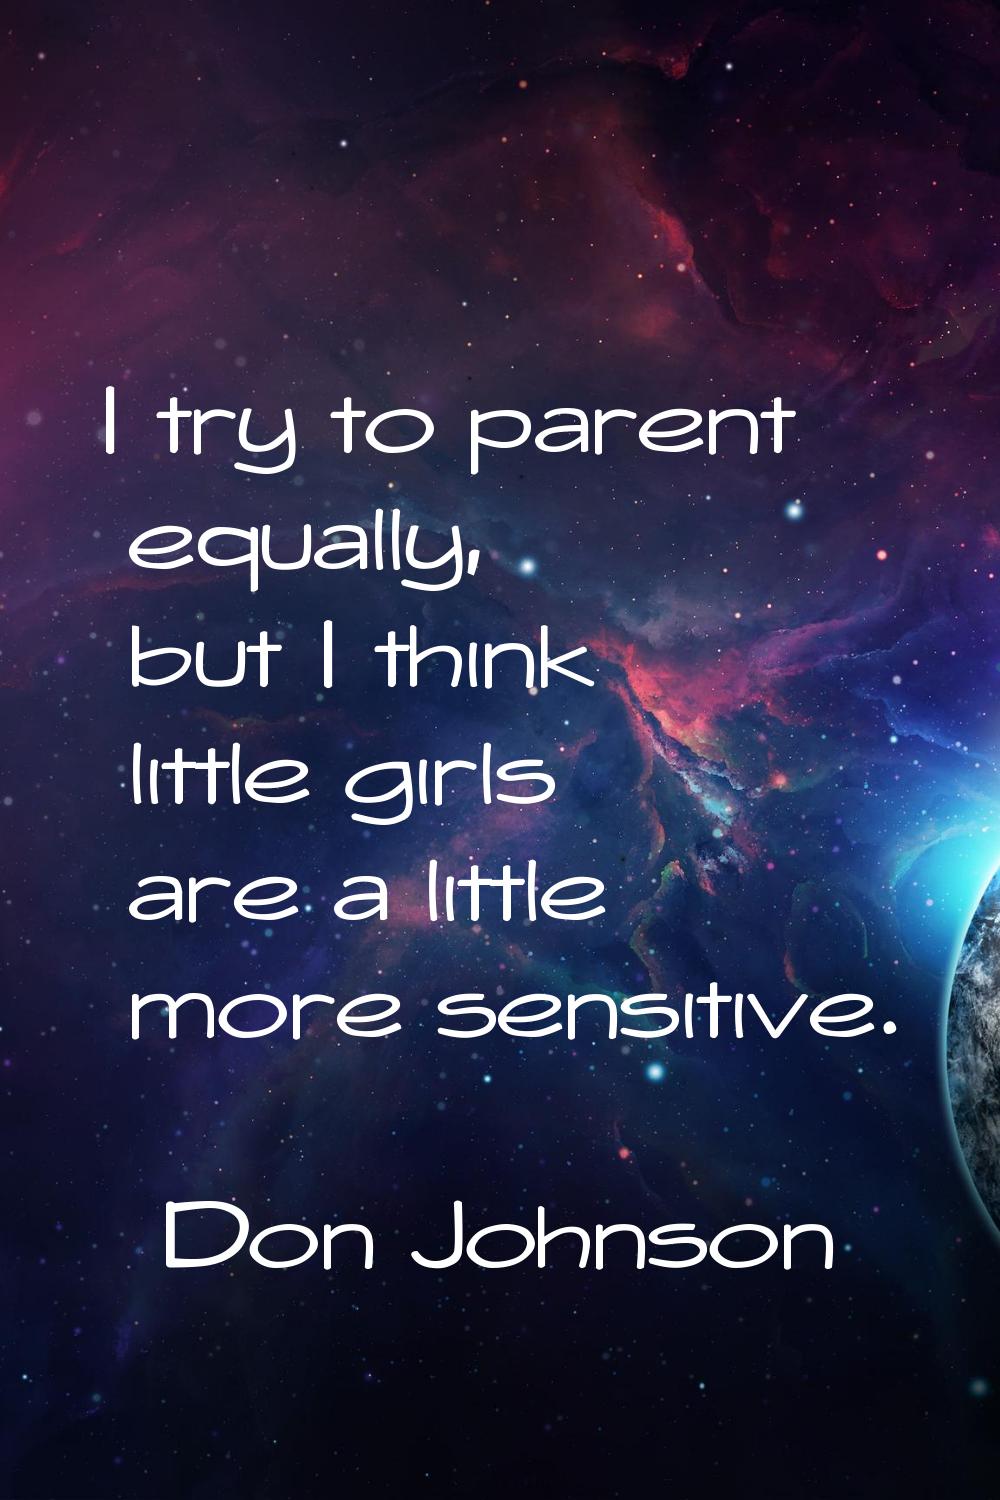 I try to parent equally, but I think little girls are a little more sensitive.